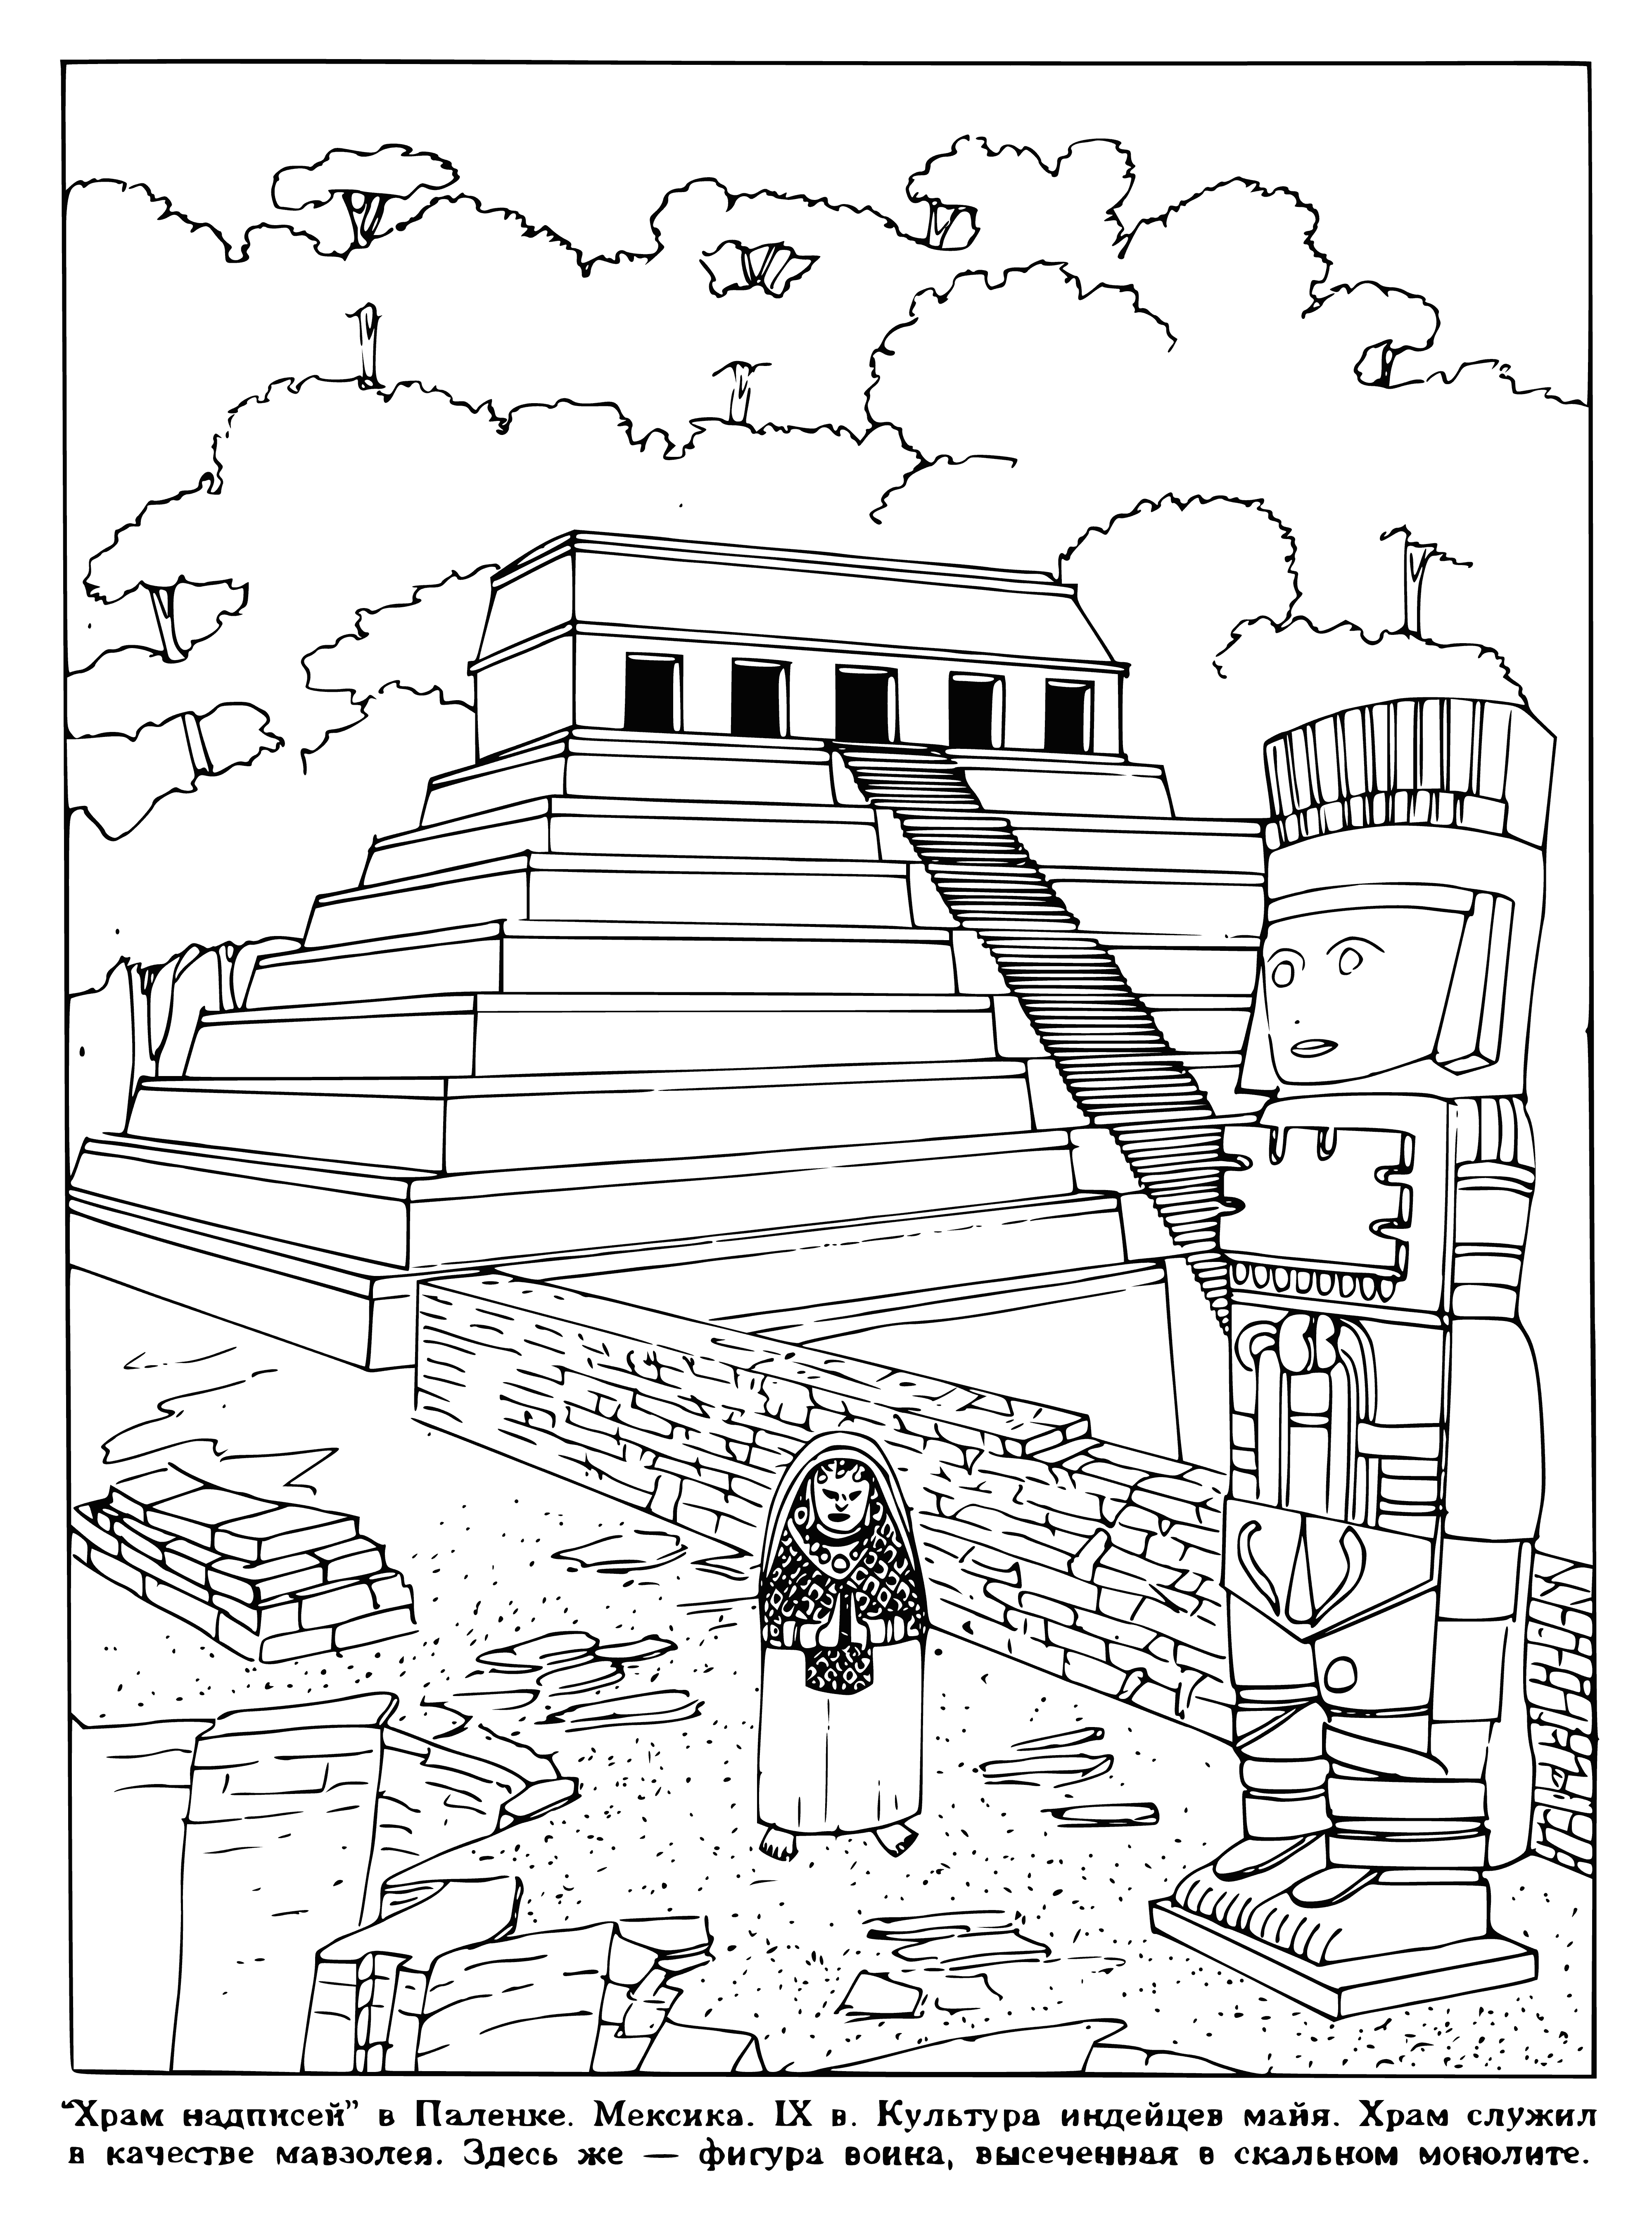 coloring page: A temple in Mexico with a pyramid in the center and staircases leading up to the top. People exploring and walking around the complex.